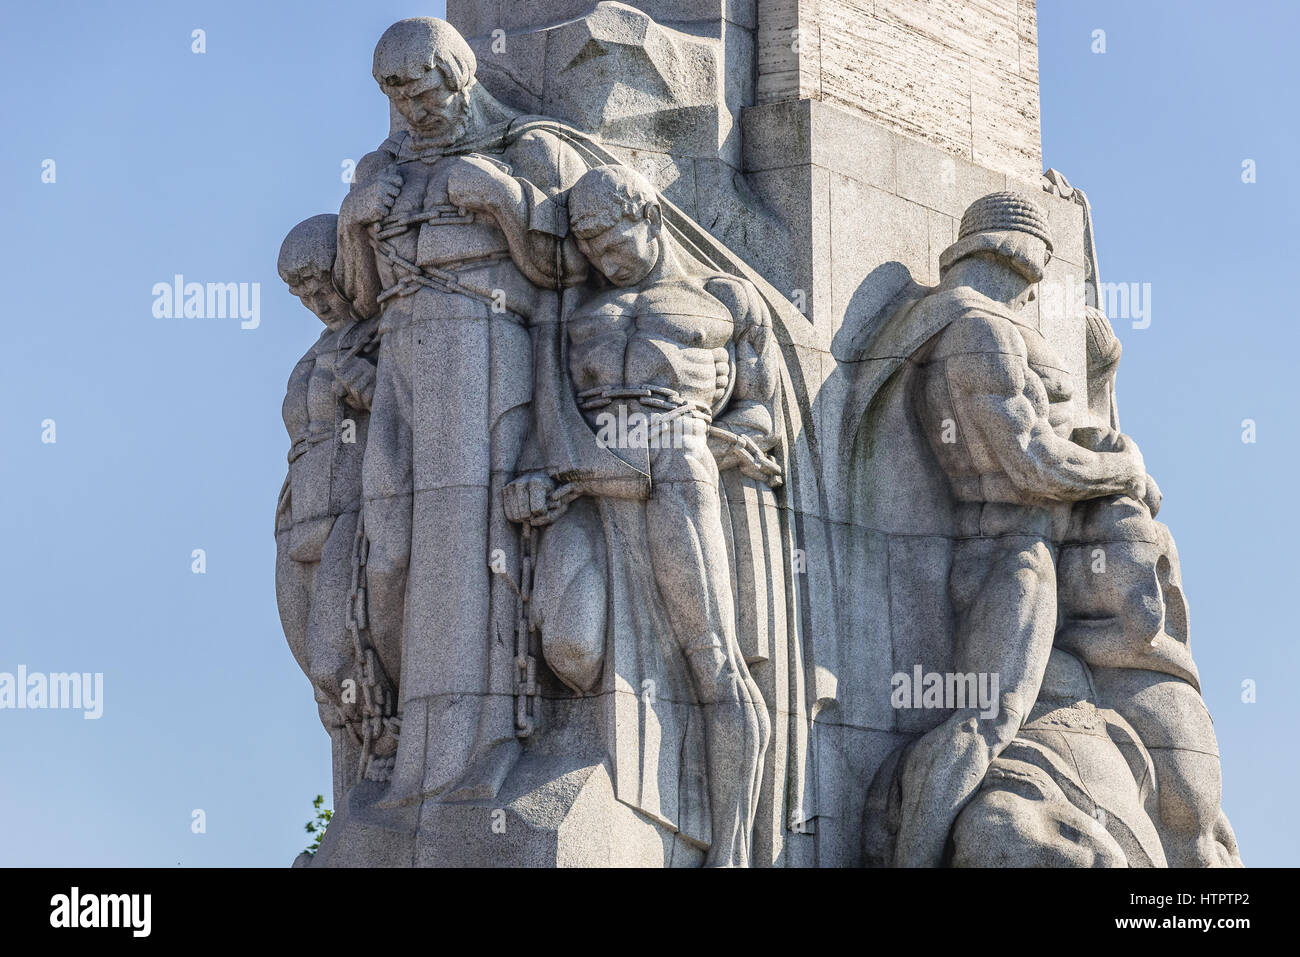 Sculptures on a socle of Freedom Monument honouring soldiers killed during the Latvian War of Independence in Riga, capital city of Latvia Stock Photo